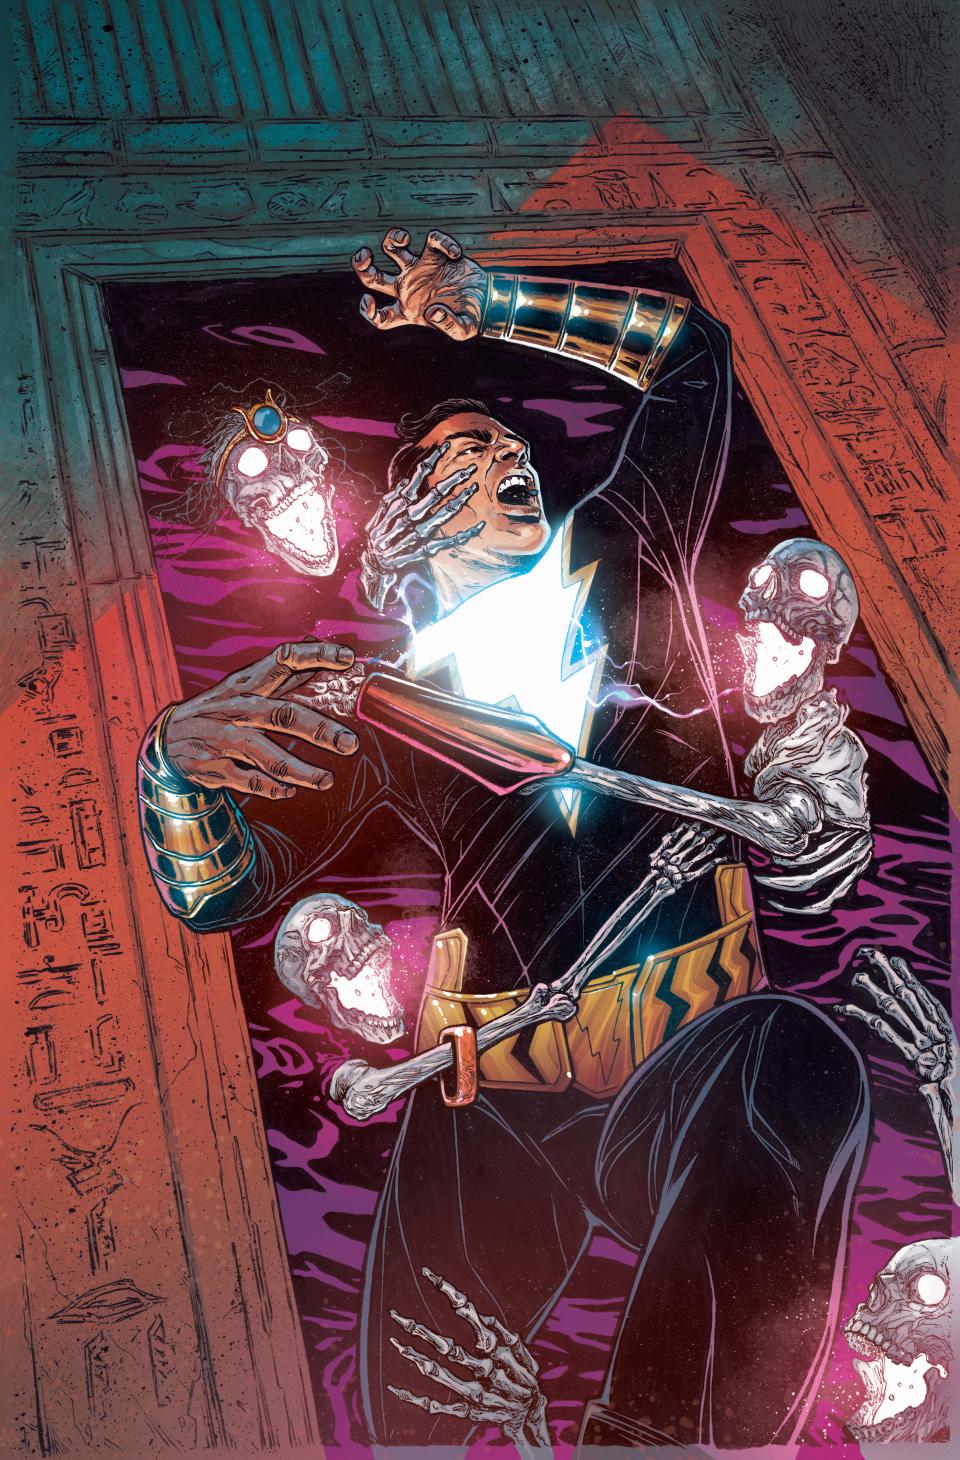 Black Adam being attacked by skeletons.